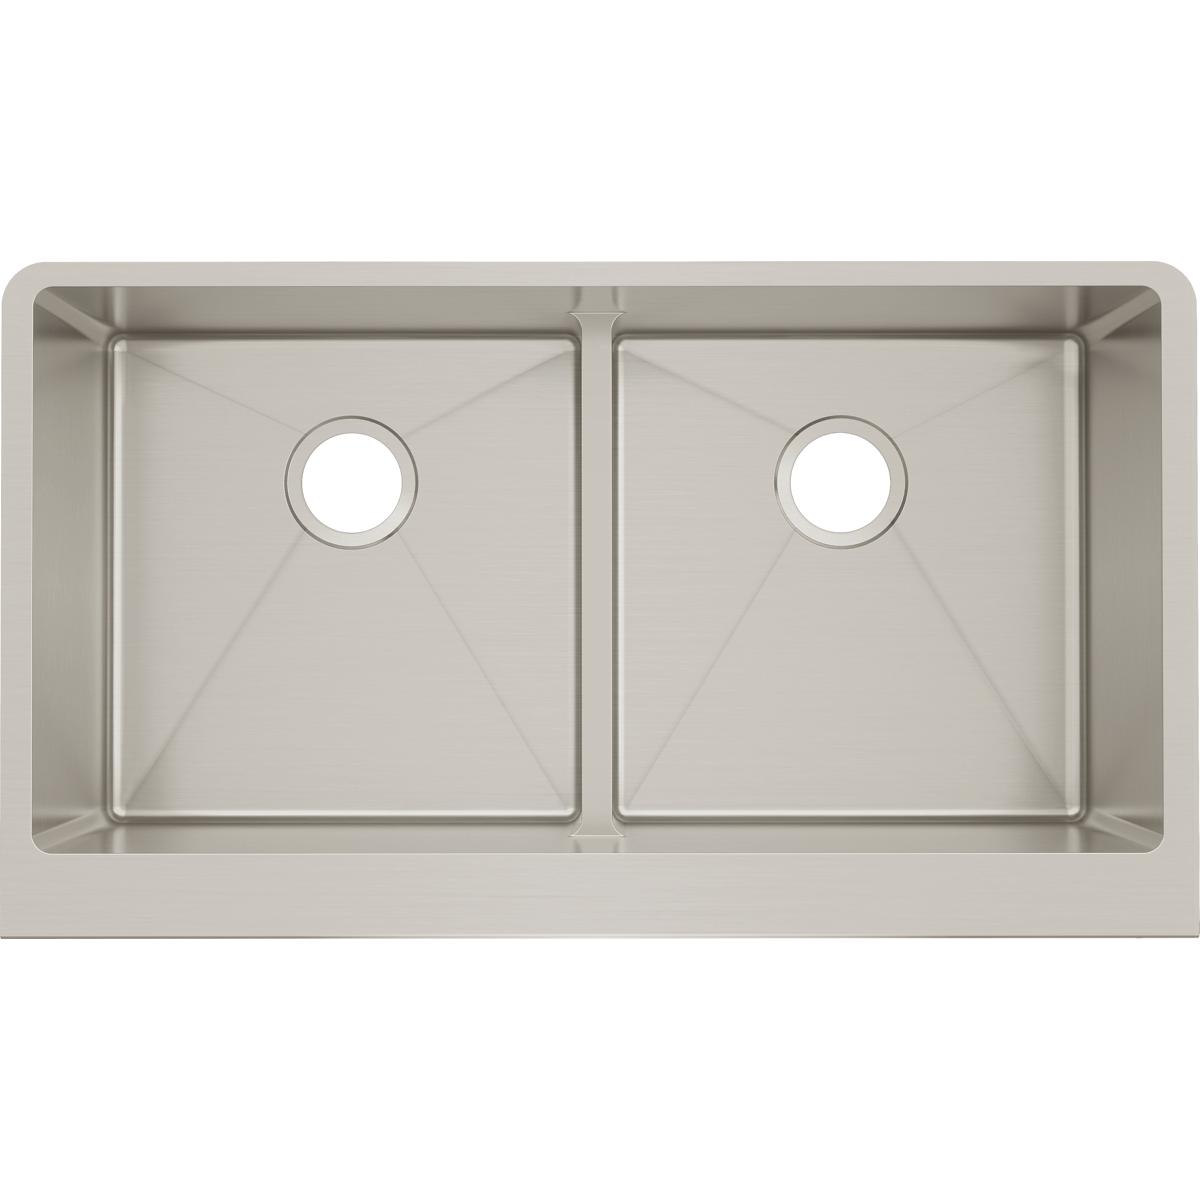 Elkay Crosstown Stainless Steel 35-7/8" x 20-5/16" x 9" Double Bowl Farmhouse Sink with Aqua Divide for Interchangeable Apron